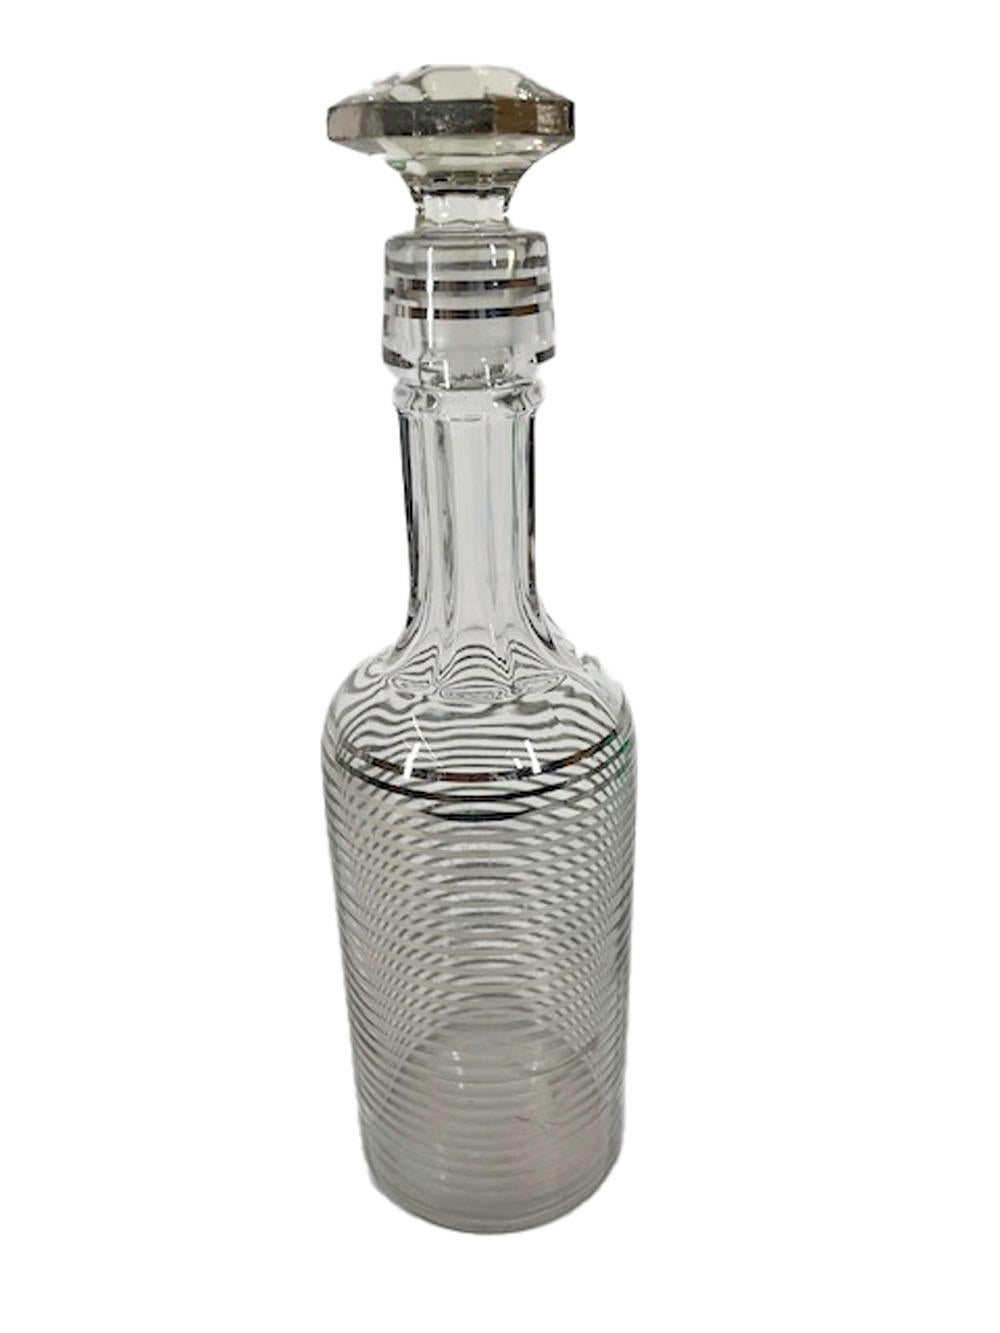 Art Deco silver decorated back bar bottle and stopper, the bottle with alternating clear and silver bands from the shoulder to the base and an undecorated faceted neck with bands at the collar, the eight-sided mushroom stopper is silvered along the